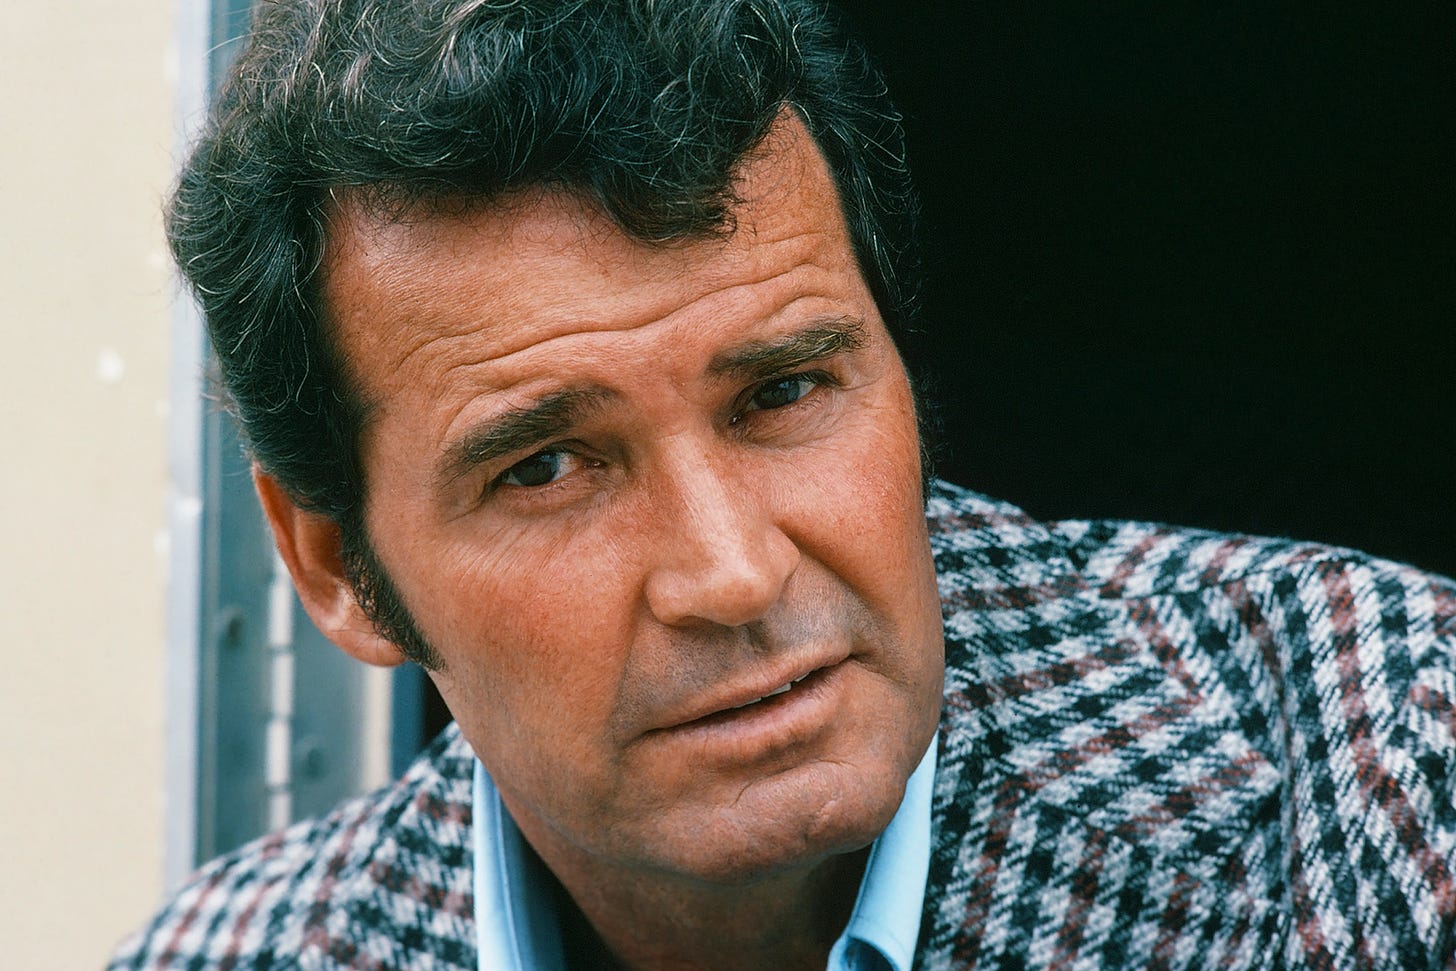 James Garner, Iconic Actor and 'Rockford Files' Star, Dead at 86